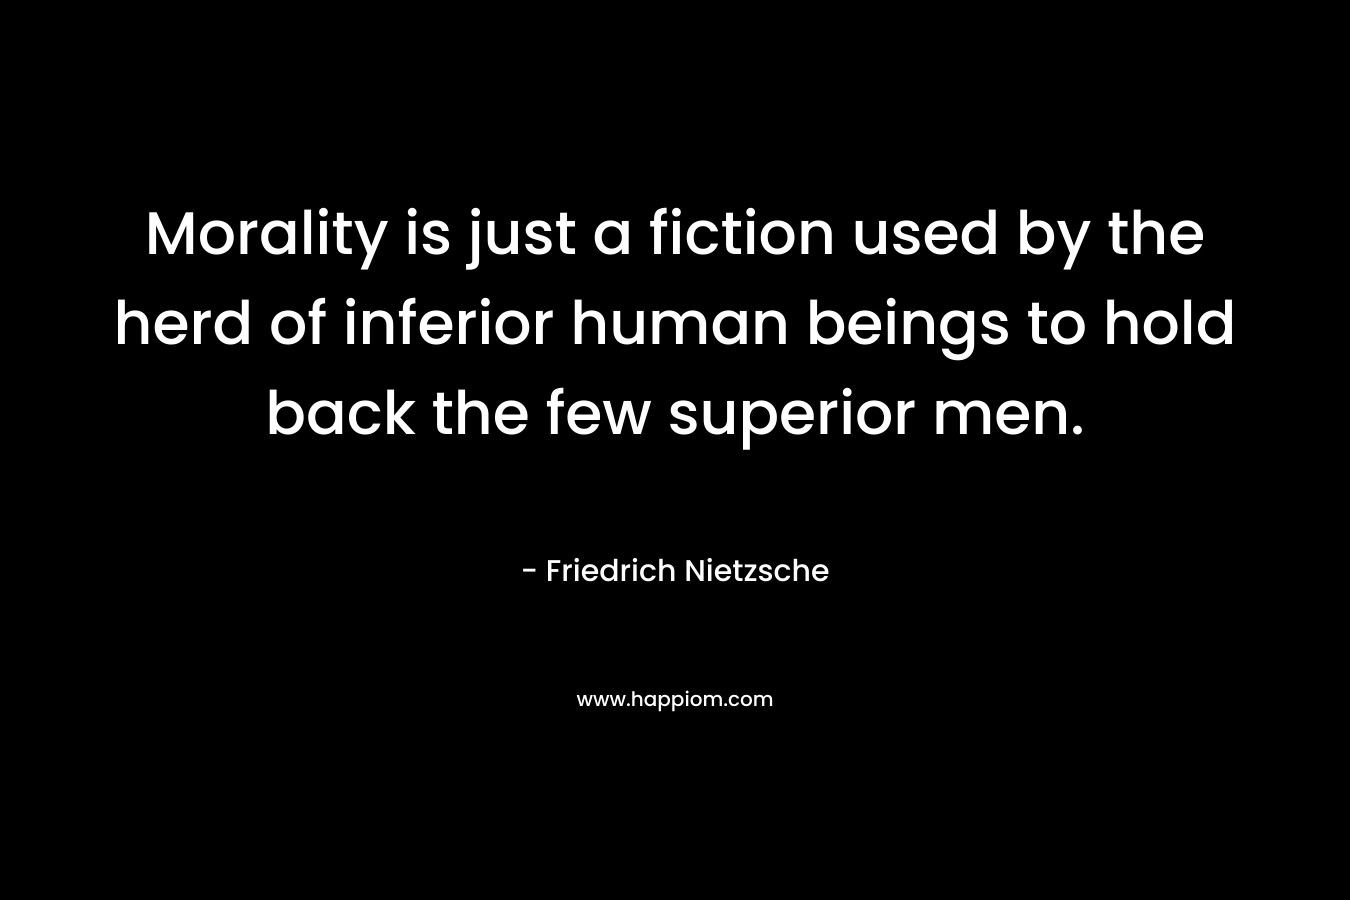 Morality is just a fiction used by the herd of inferior human beings to hold back the few superior men. – Friedrich Nietzsche